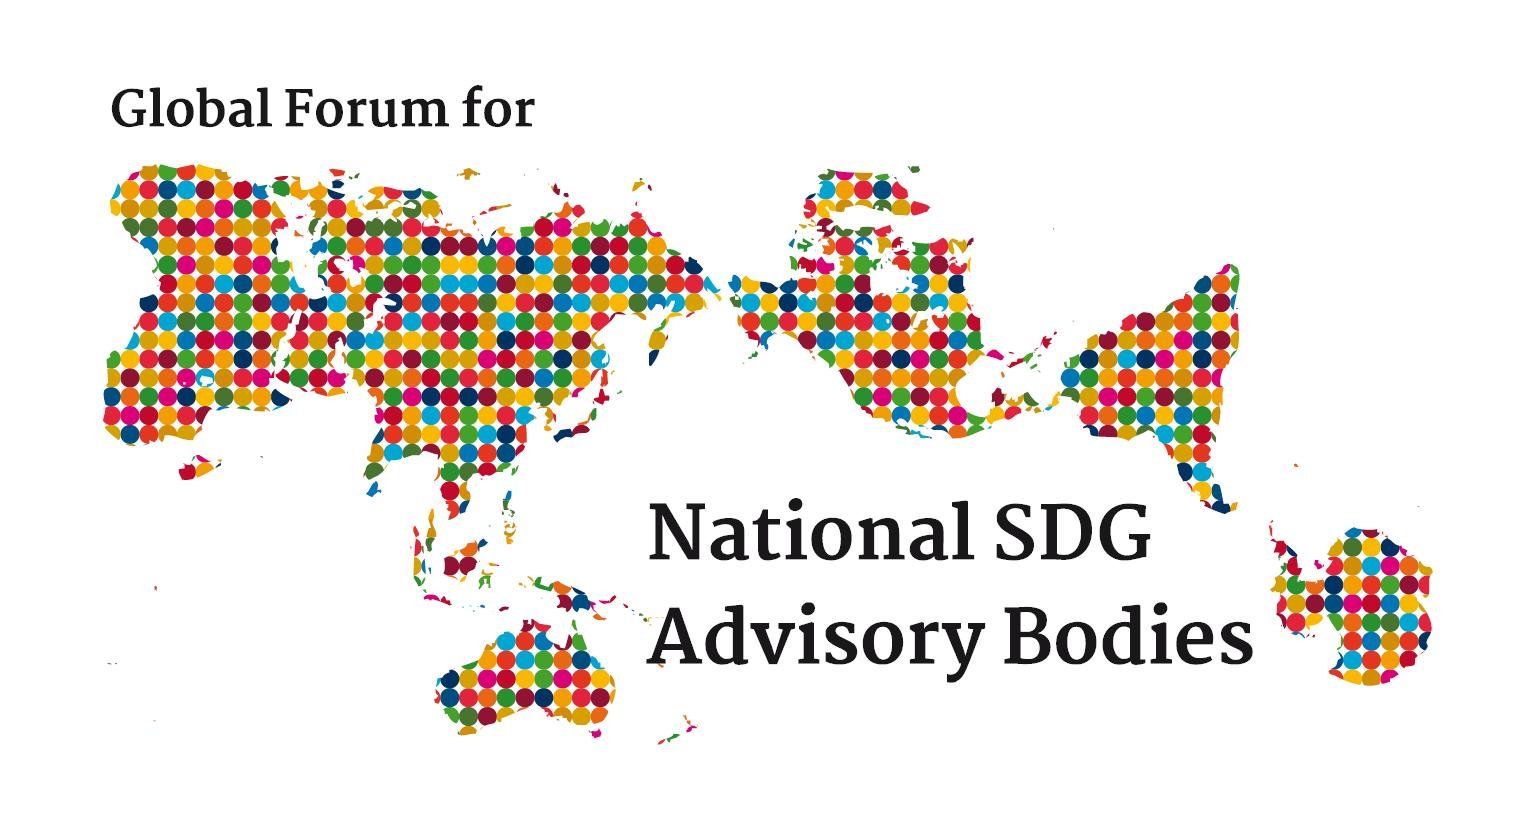 Information from the Global Forum for National SDG Advisory Bodies, its members, and other stakeholders